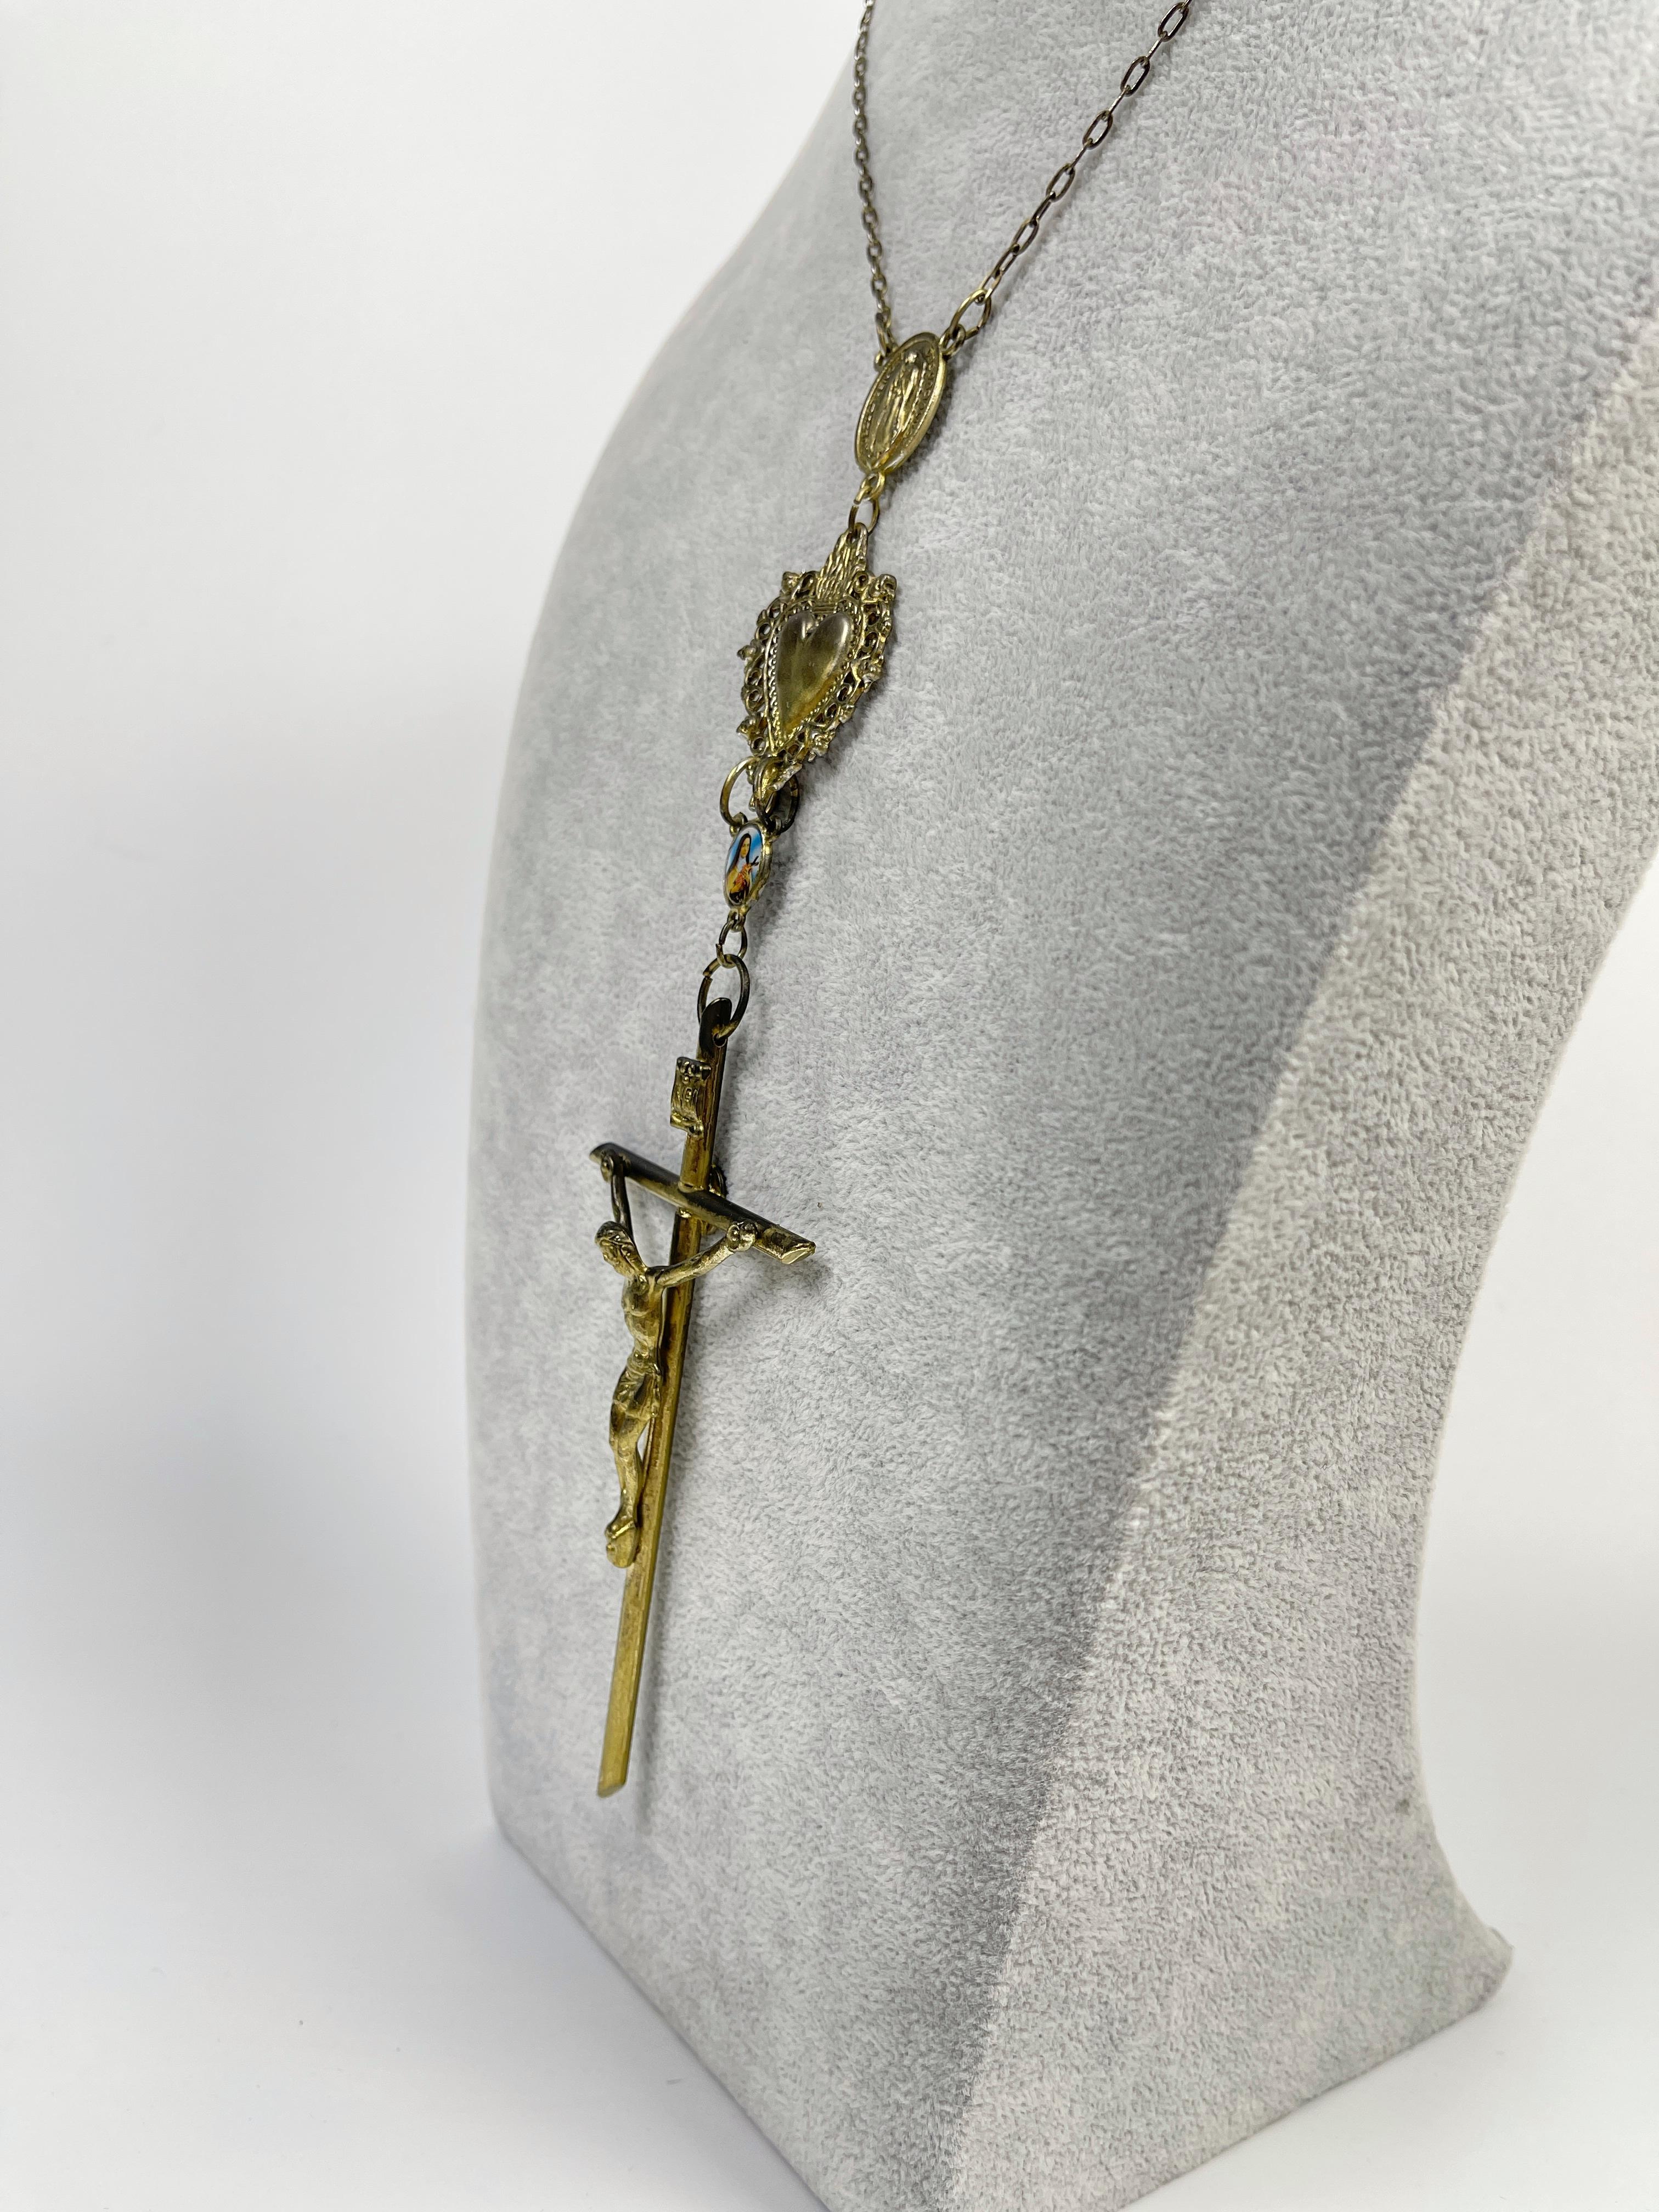 Jean Paul Gaultier 1990's Staff Sample Crucifixion Necklace In Good Condition For Sale In Seattle, WA